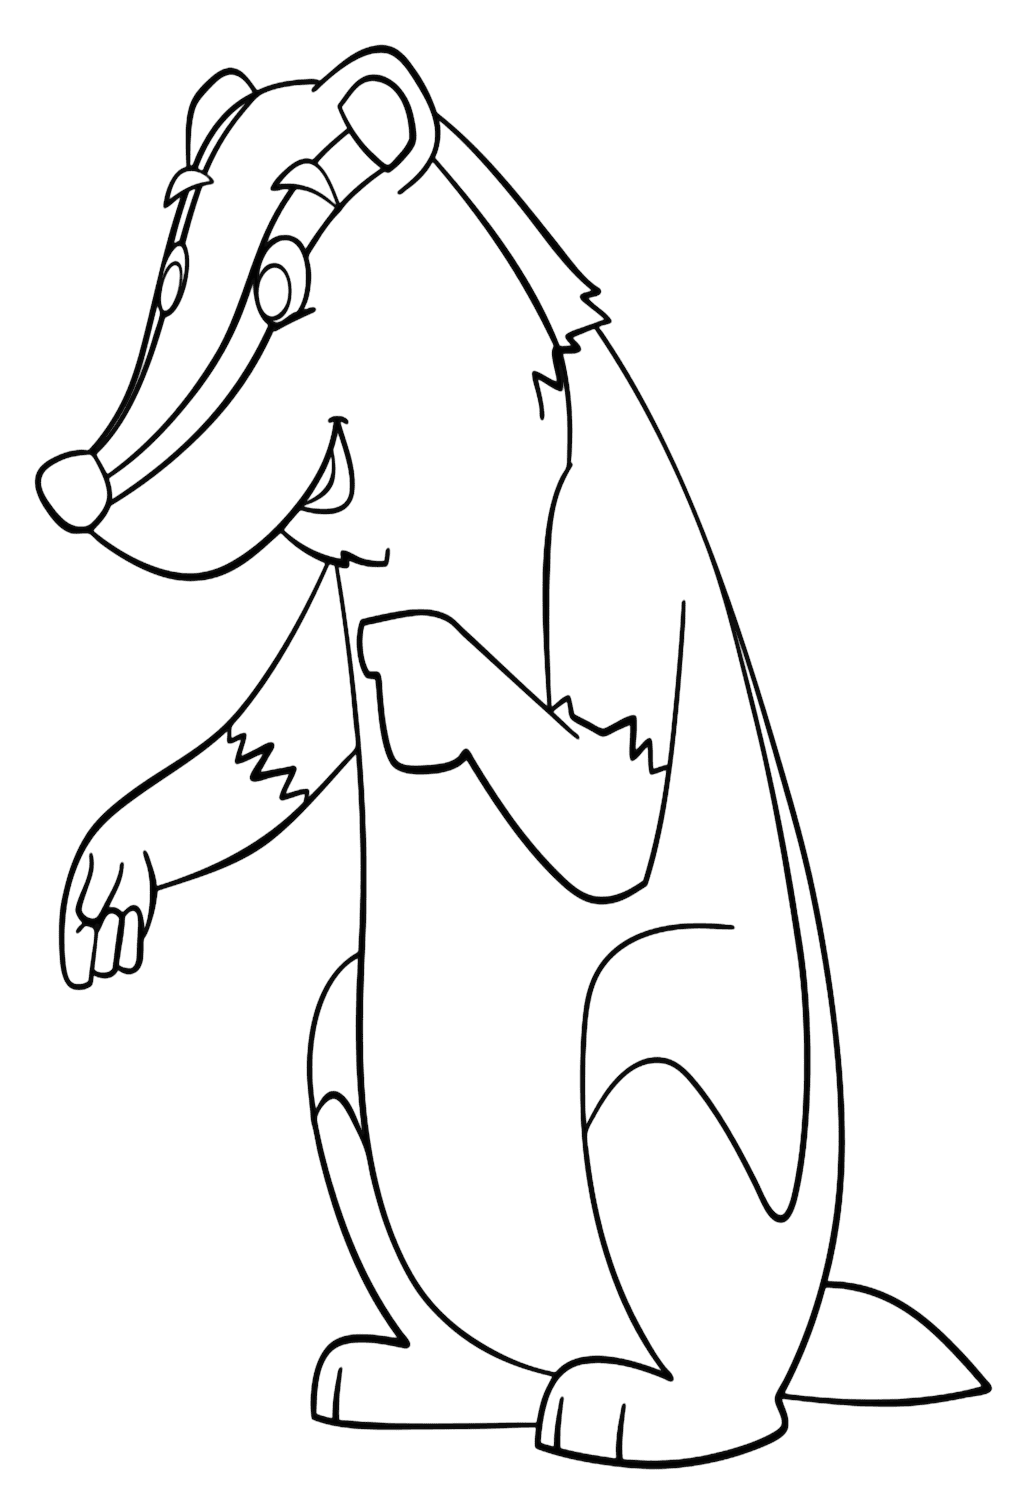 Cartoon Badger Coloring Page from Badger